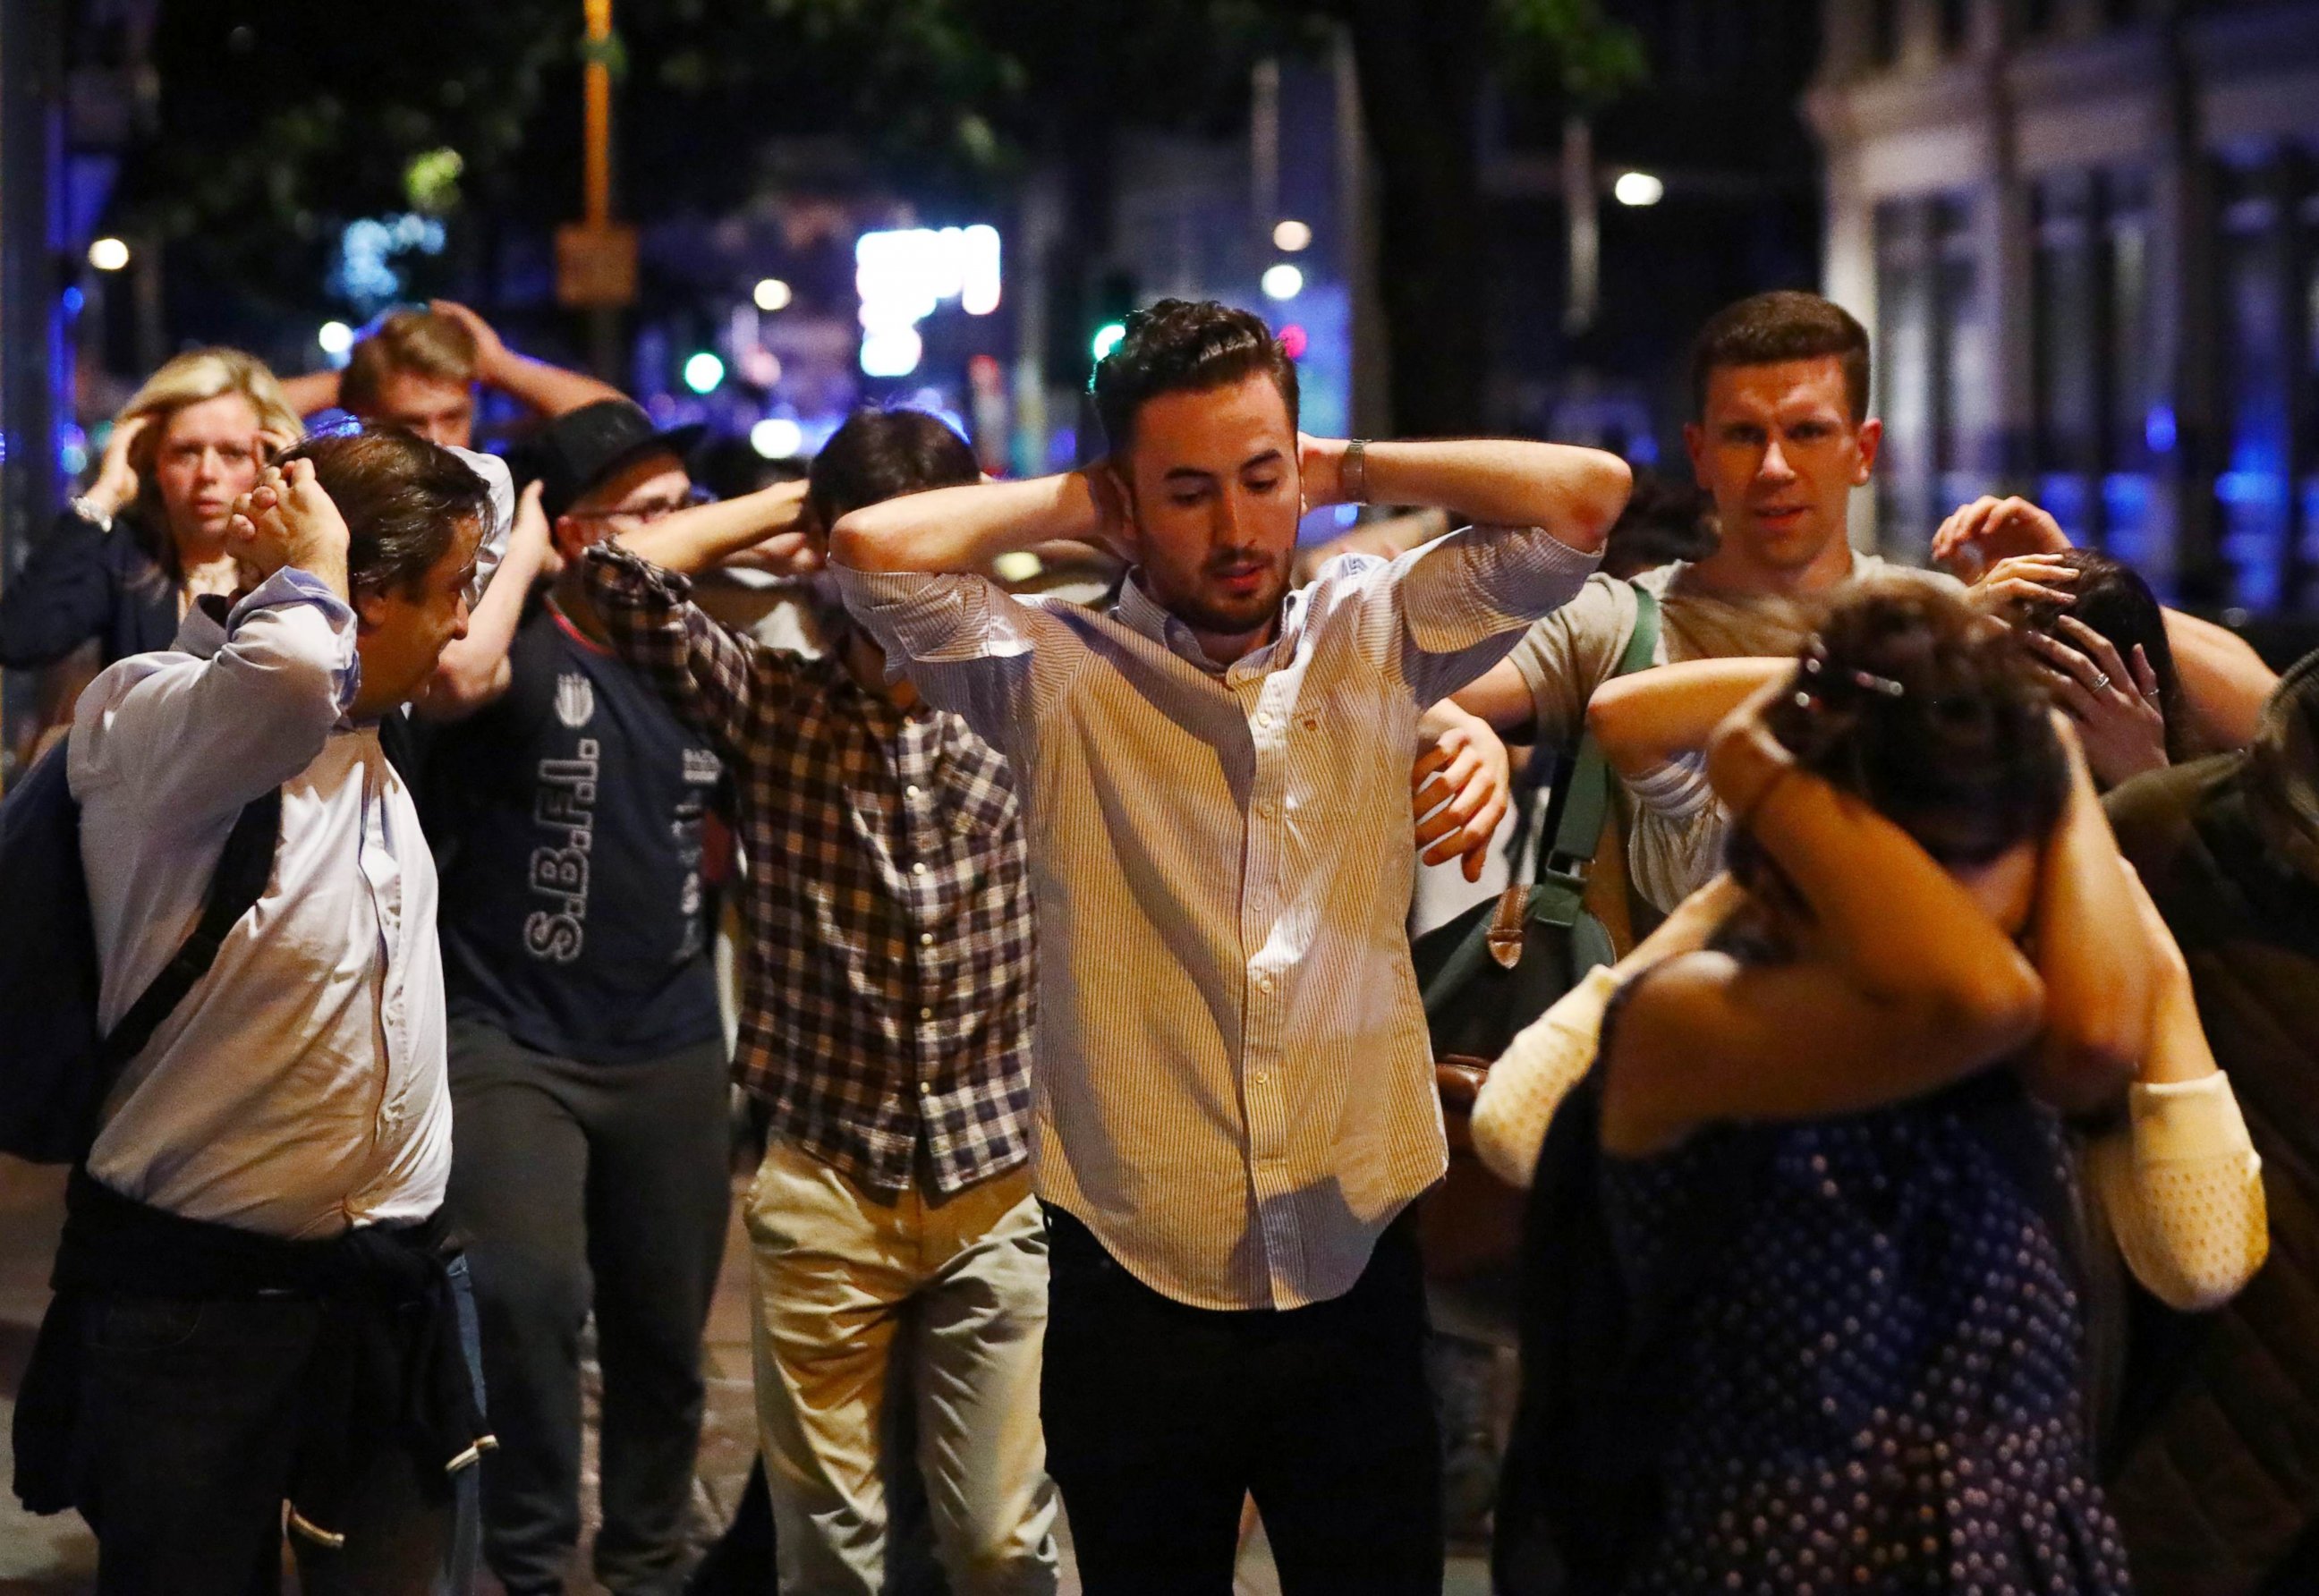 PHOTO: People leave the area with their hands up after an incident near London Bridge in London, June 4, 2017.